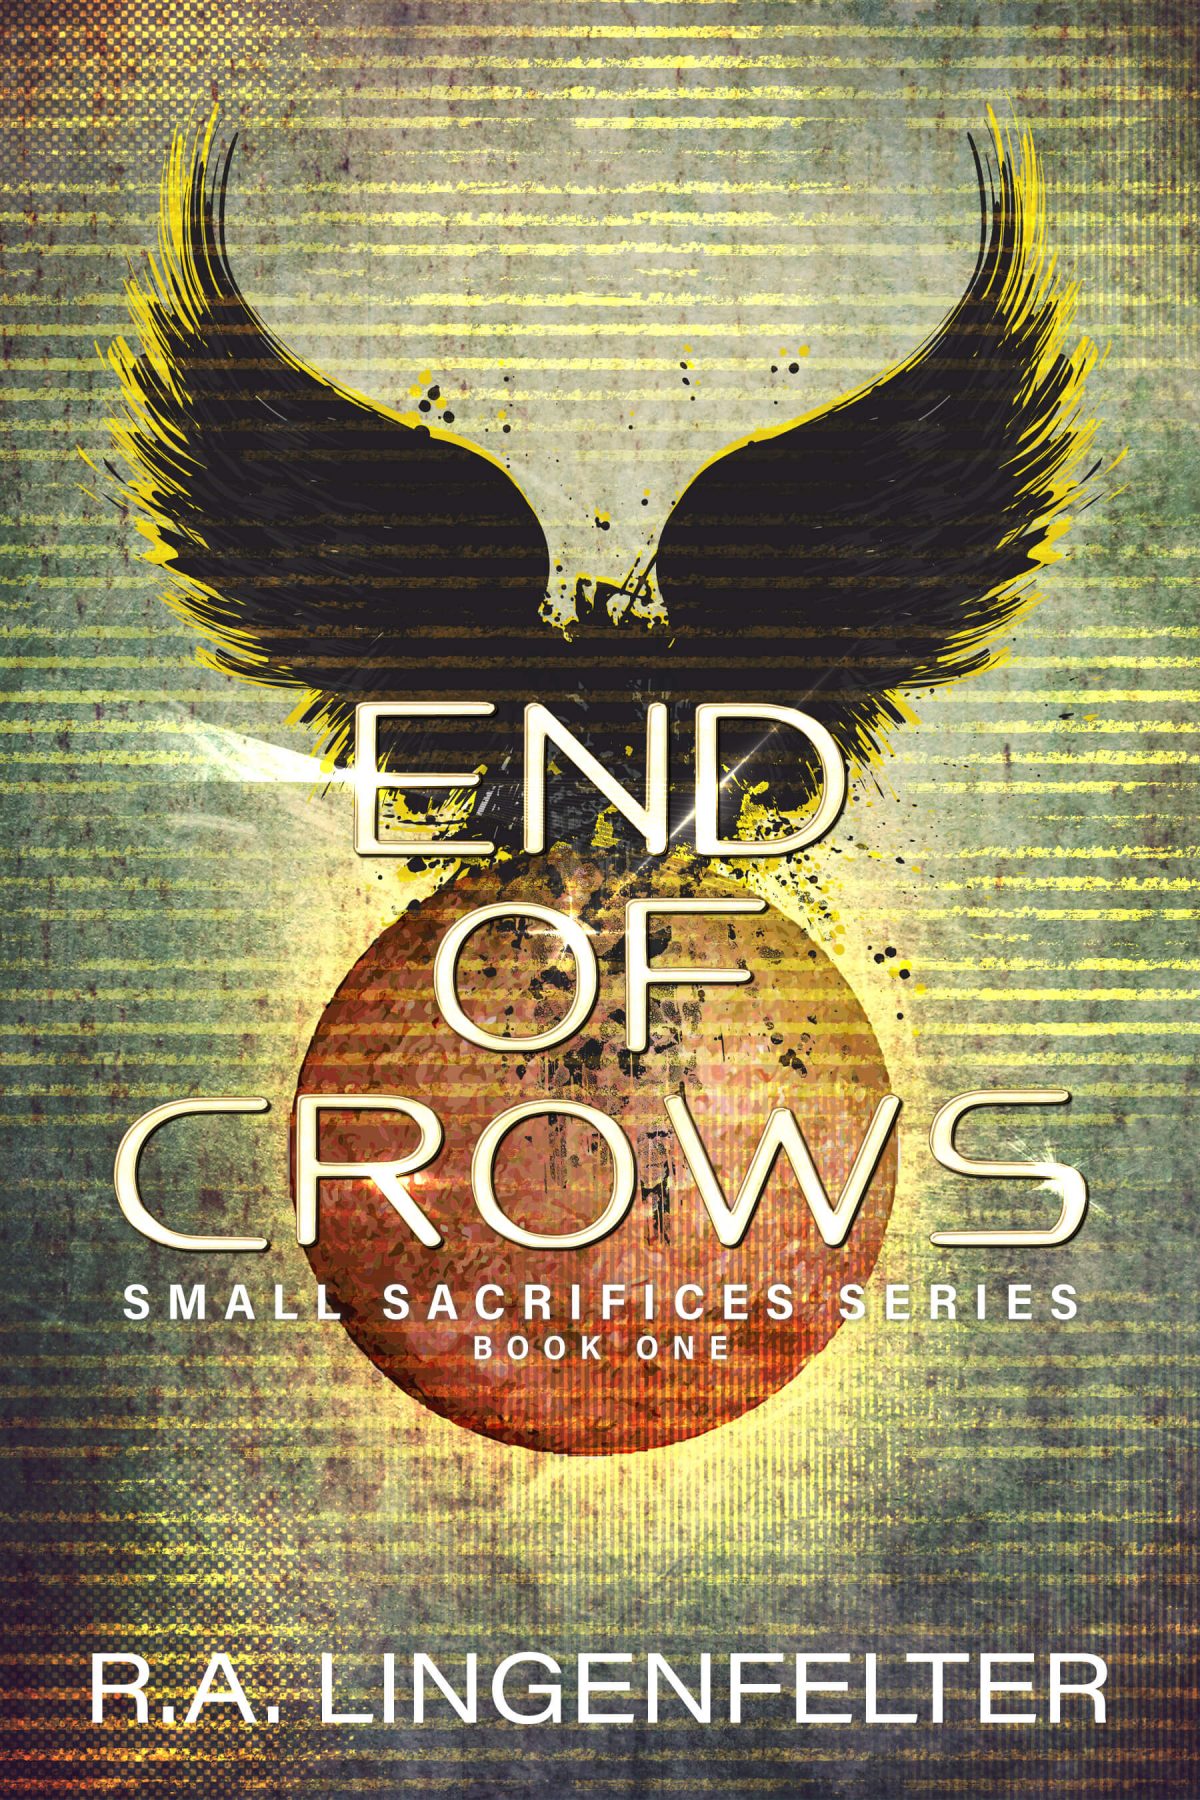 End of Crows – Small Sacrifices Series